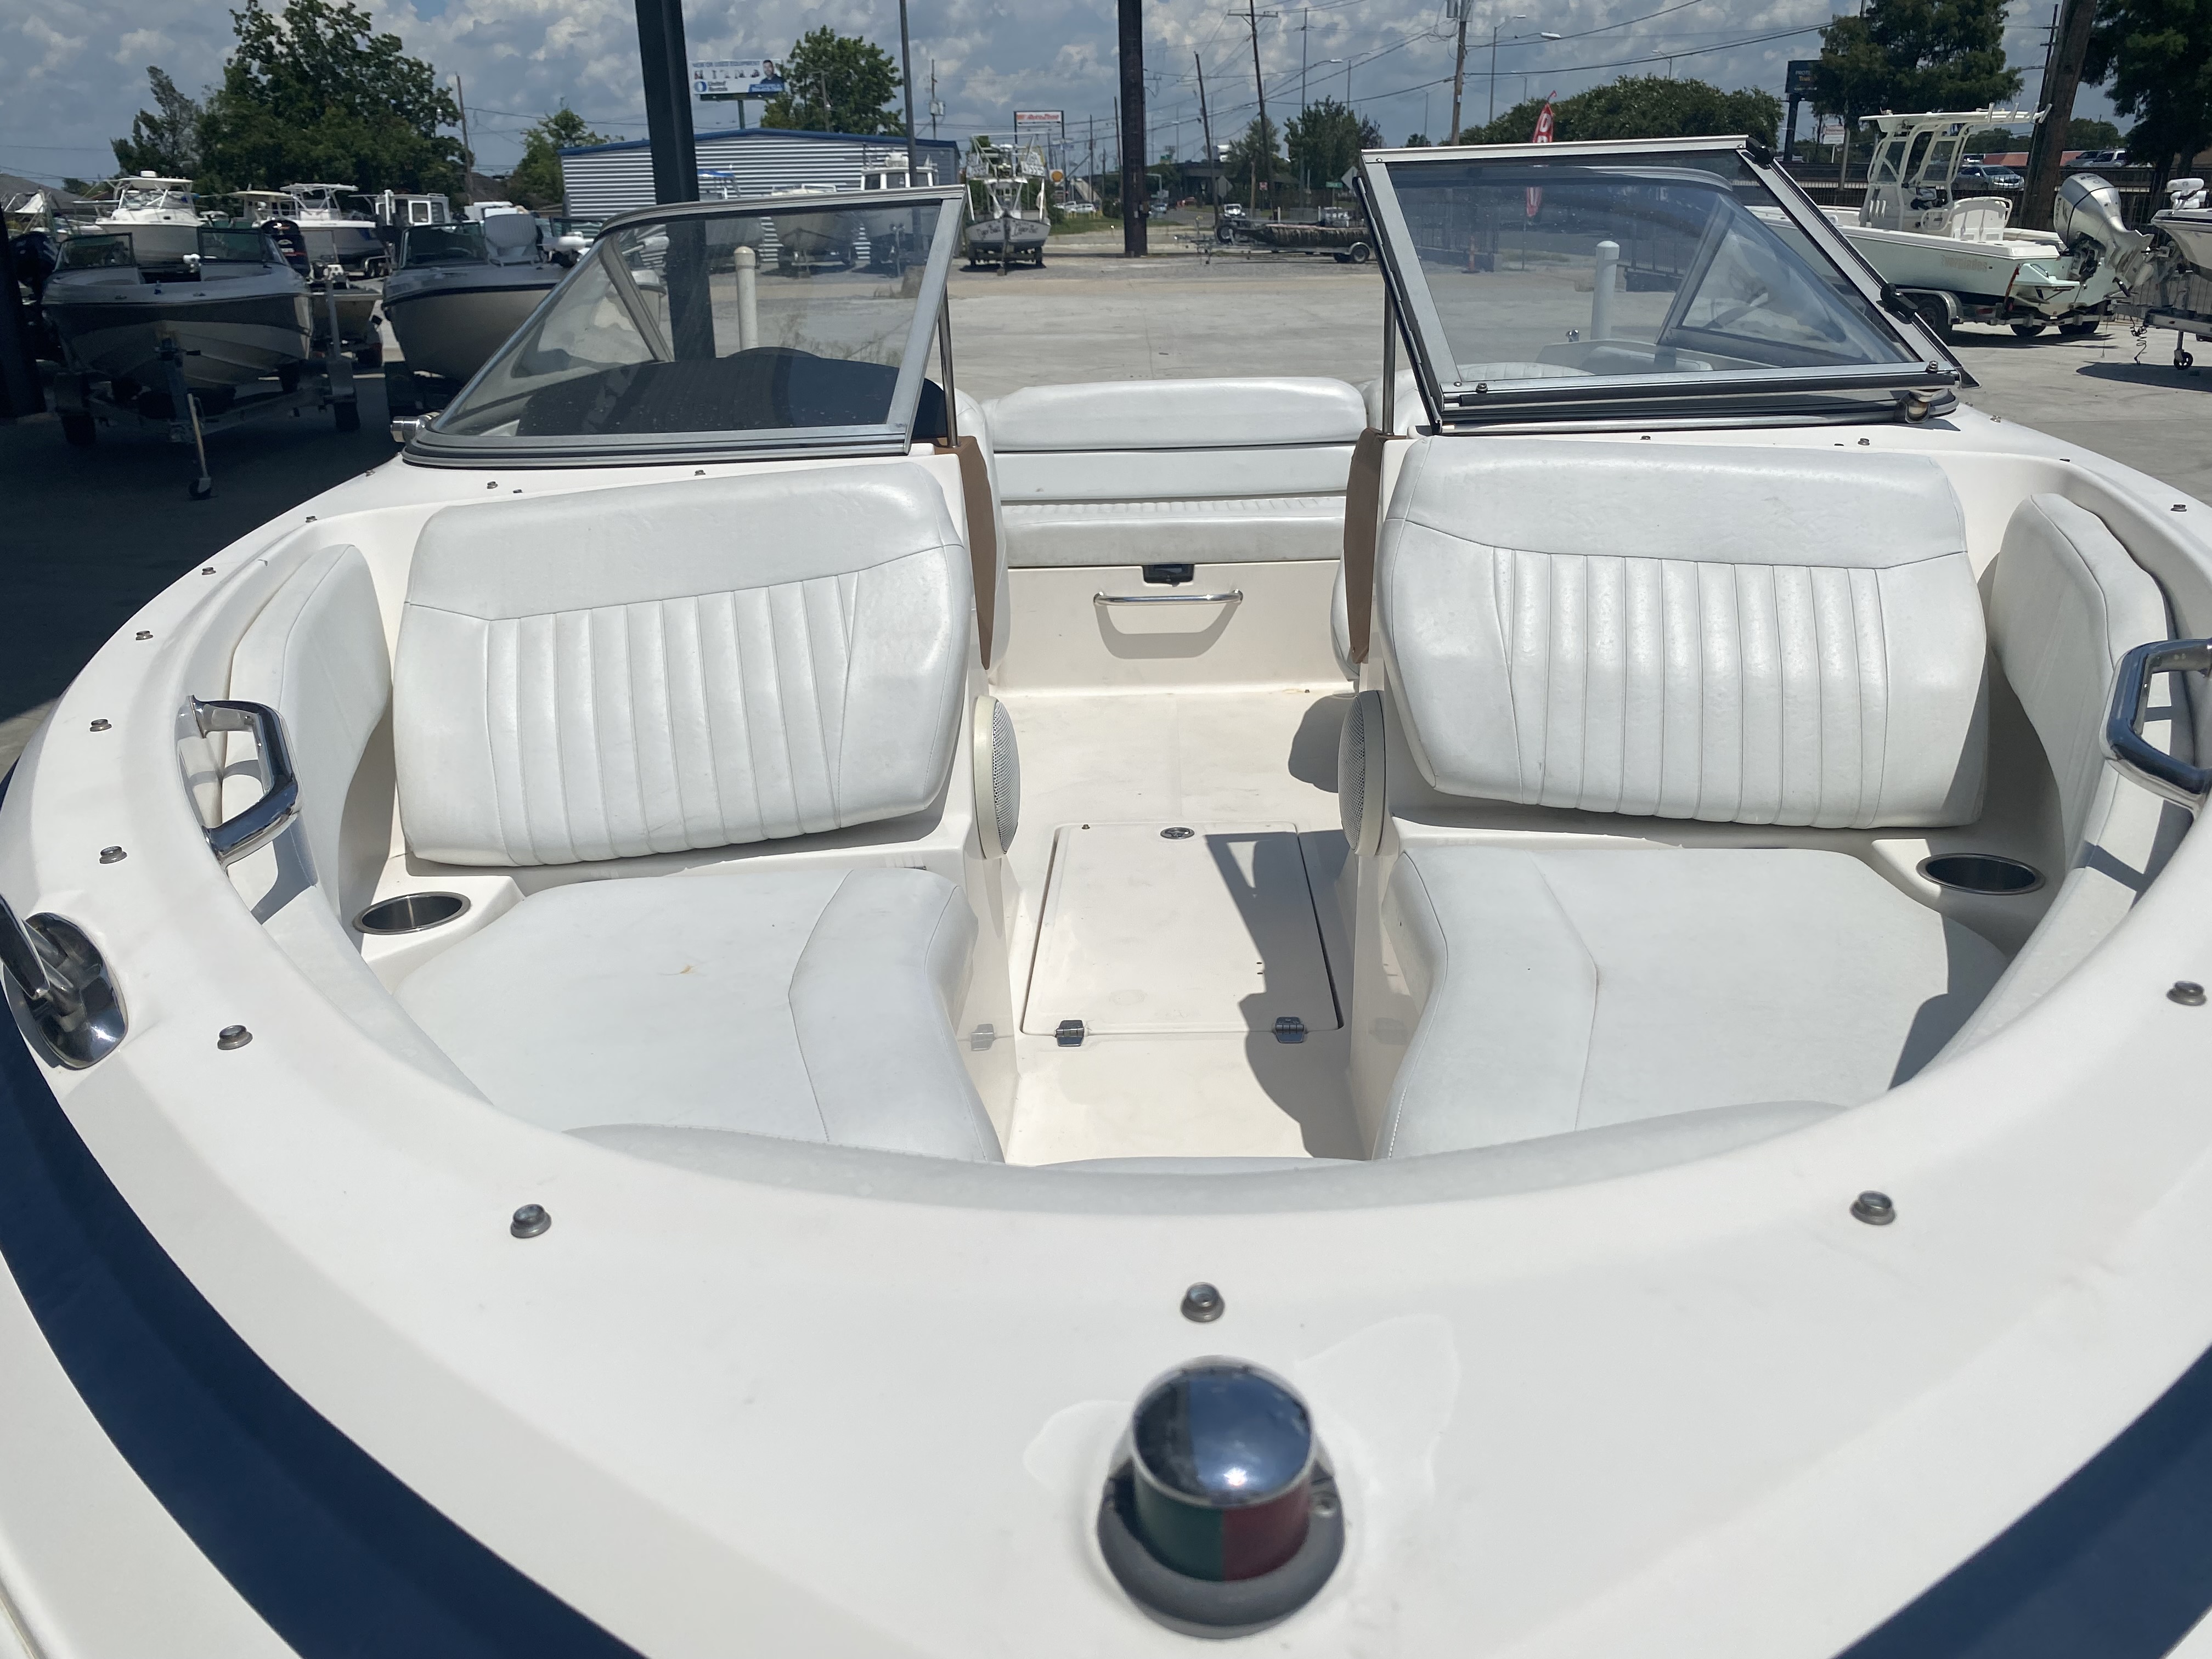 2007 Regal boat for sale, model of the boat is Sport Boat 2000 Bowrider & Image # 10 of 11